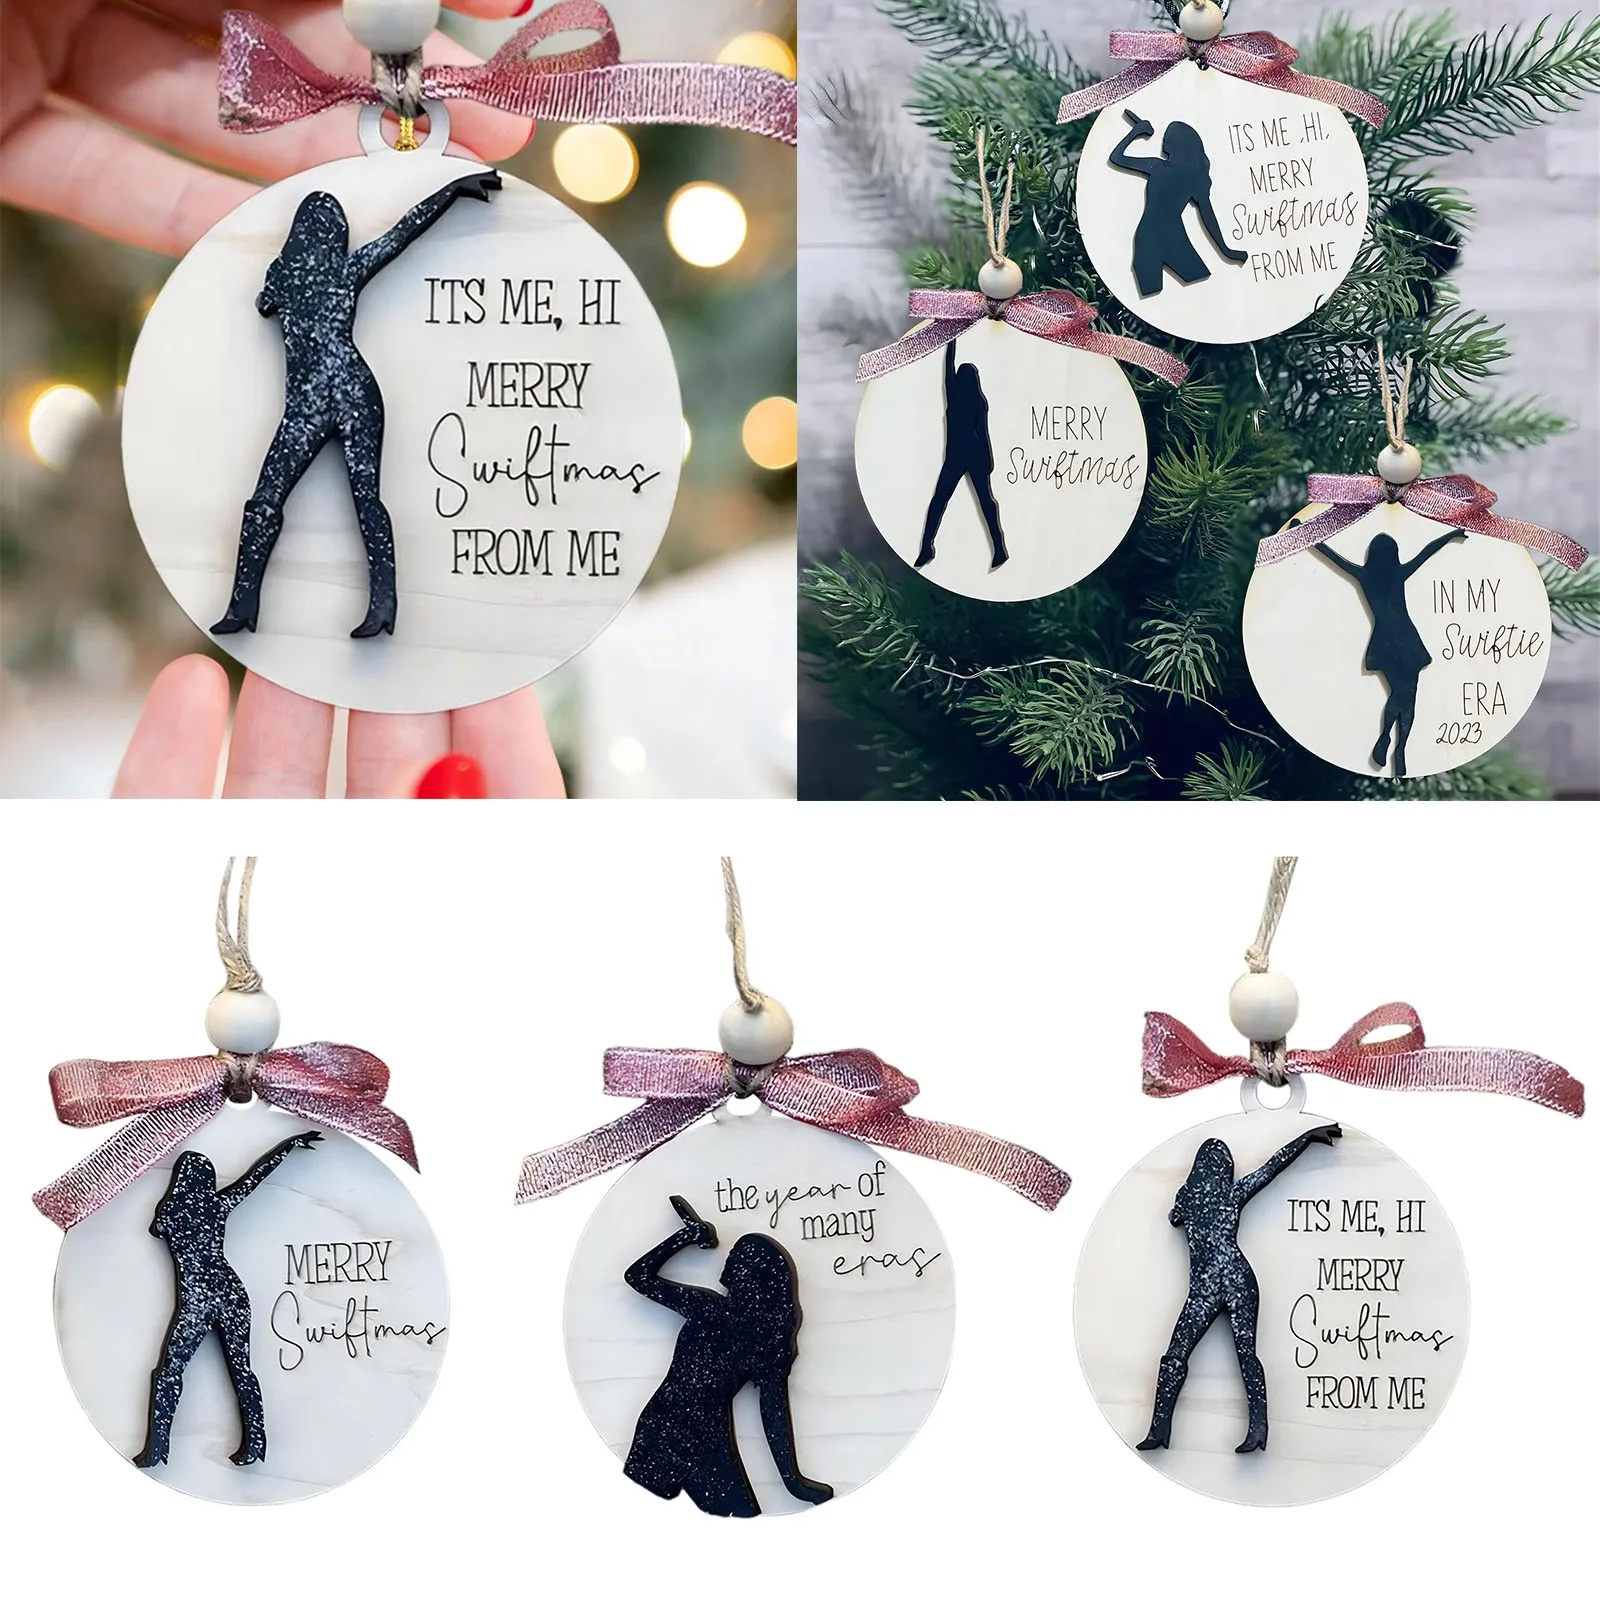 https://ae01.alicdn.com/kf/S695f081d0a054d44b78222e6fd689676m/Wooden-Hanging-Ornament-Christmas-Tree-Decorations-Round-Figure-Christmas-Gift-Taylor-Swift-Vocal-Concert-Decorations-Goods.jpg